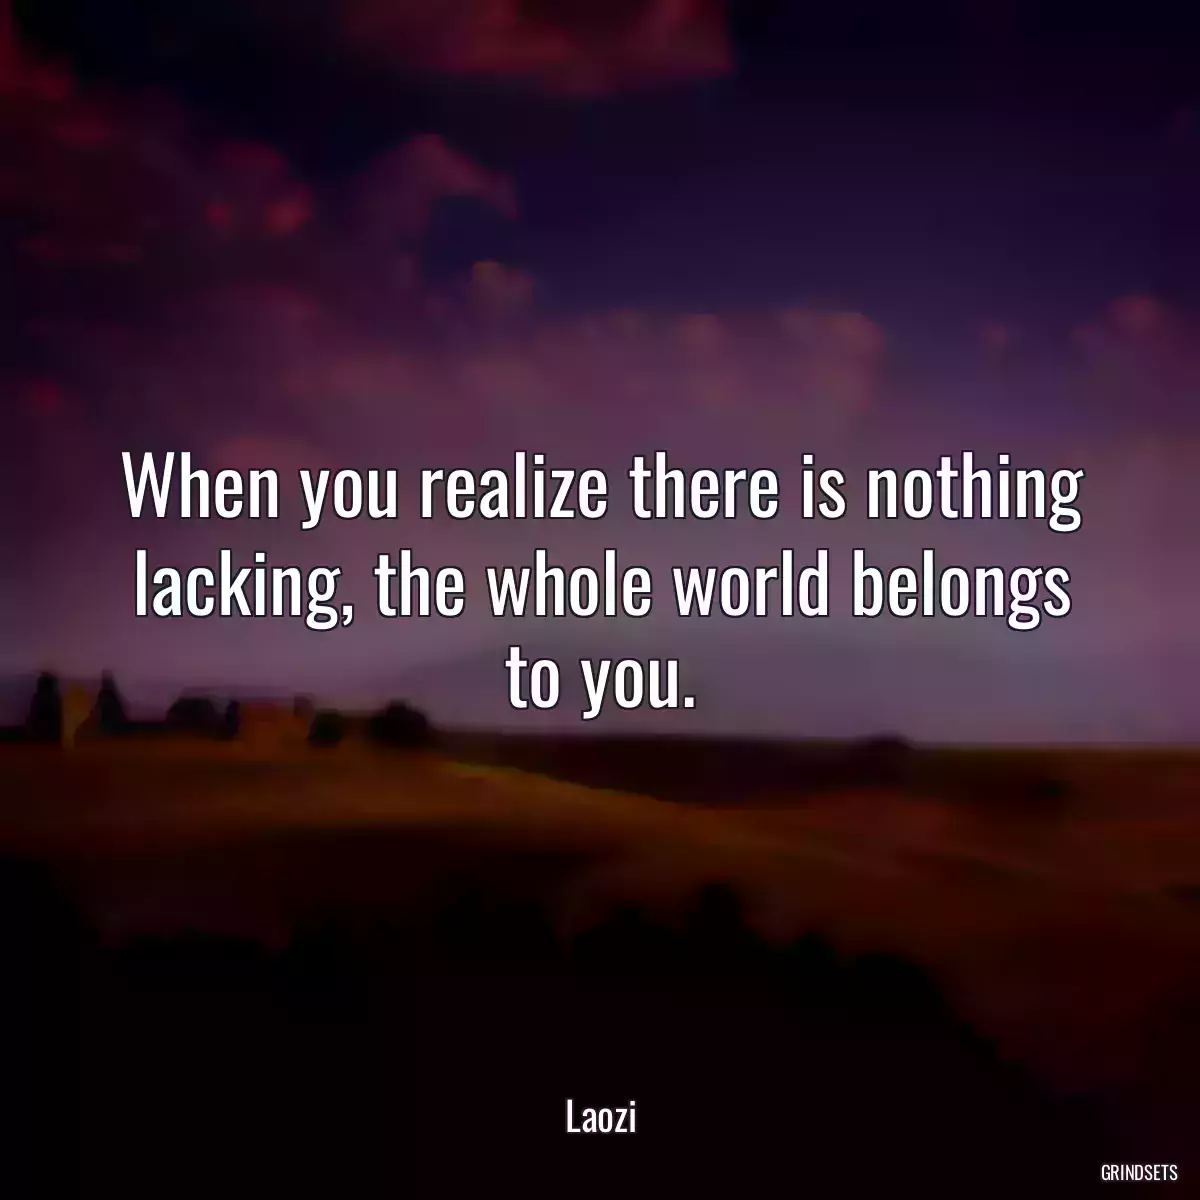 When you realize there is nothing lacking, the whole world belongs to you.